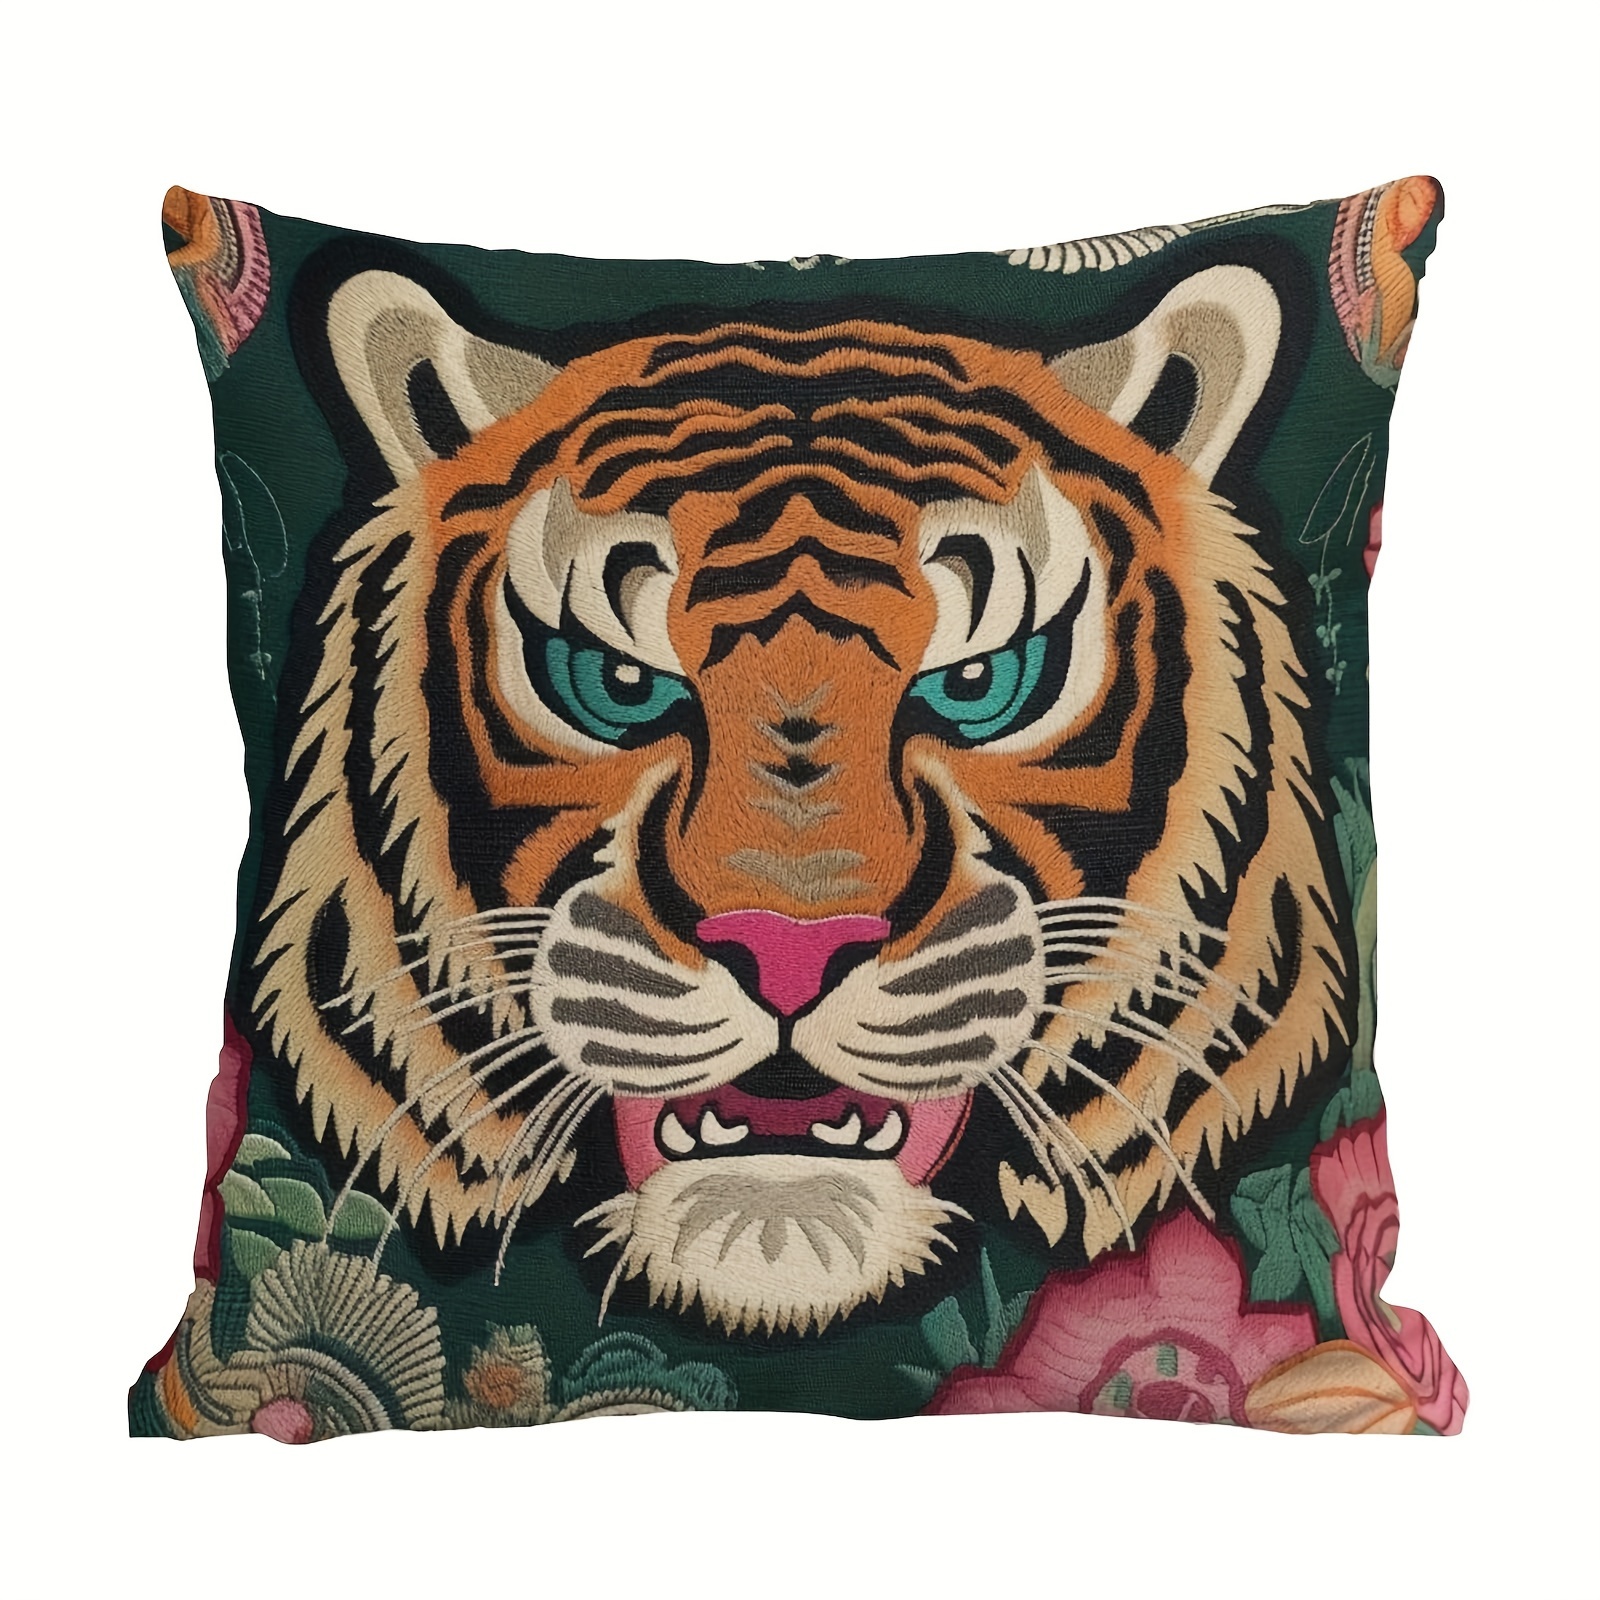 

1pc Aroggeld Tiger Pillow Colorful Chinoiserie Style Pillow Case Tibetan Tiger Euro Sham Pillow Cover Asian Cushion Cover Accent Pillowcase Rustic Home Decor For Sofa Living Room Bedroom 18x18 Inches